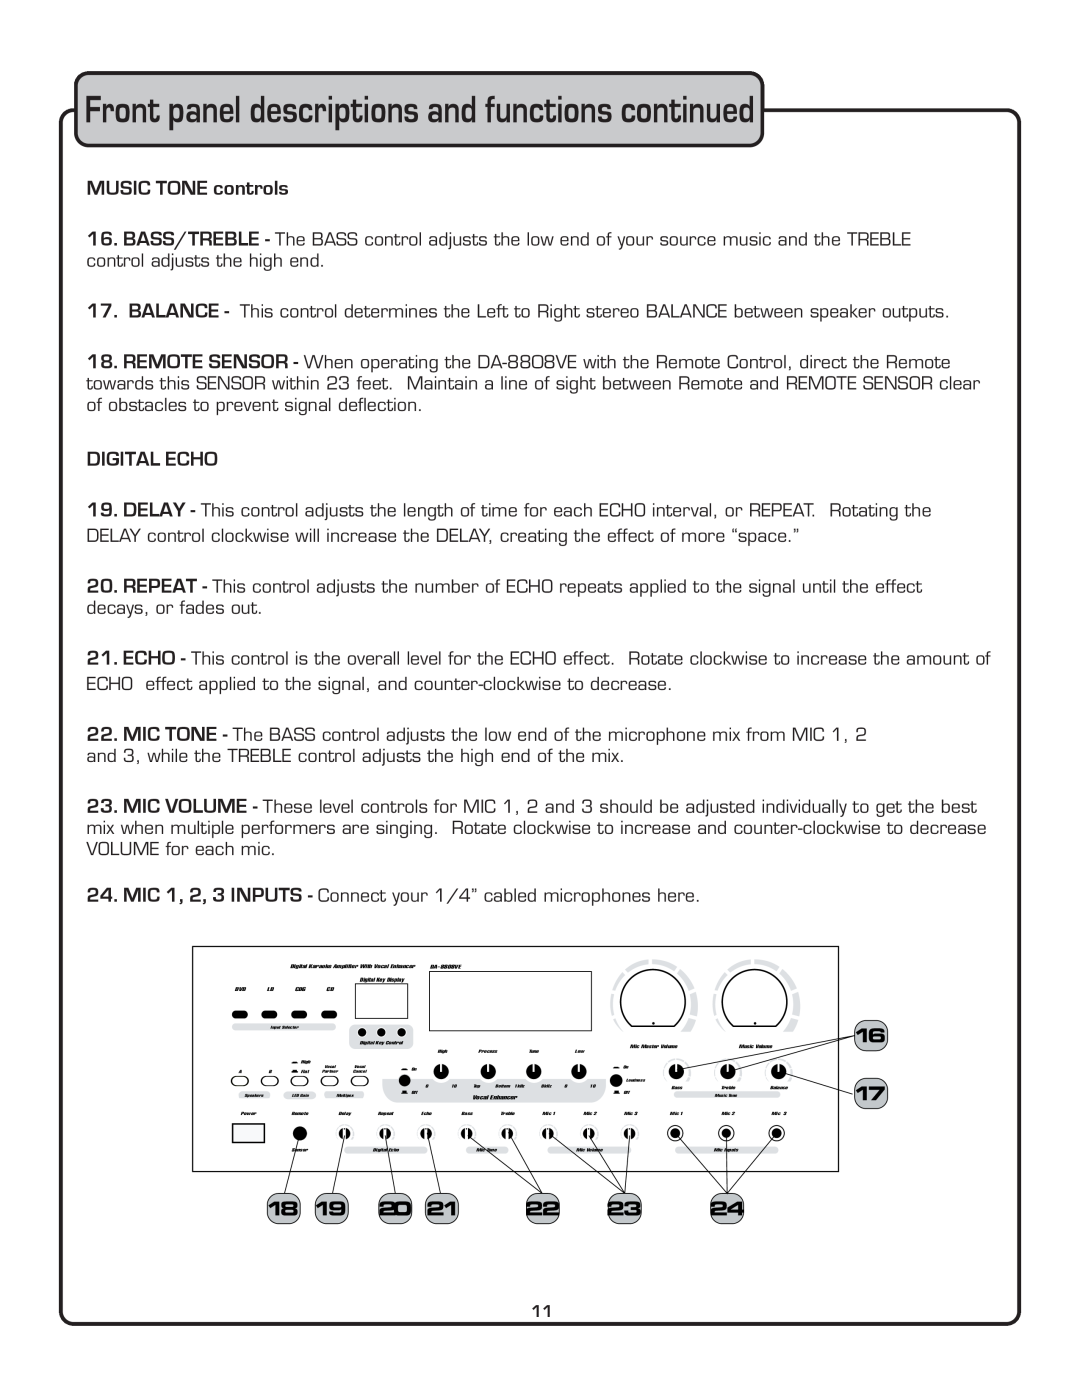 VocoPro DA-8808VE owner manual Front panel descriptions and functions continued, MUSIC TONE controls, Digital Echo 